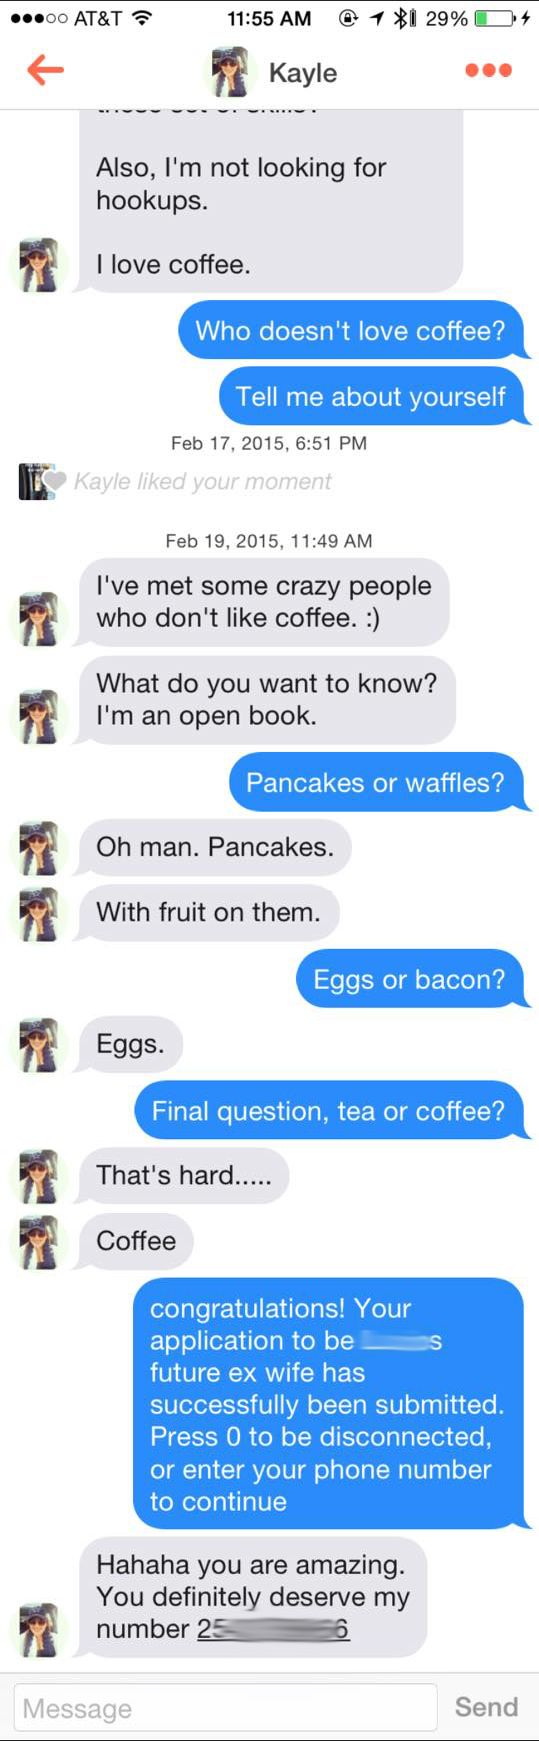 This Guy Is Cleaning Up On Tinder Using His Own 'Cheat Code' (9 pics)